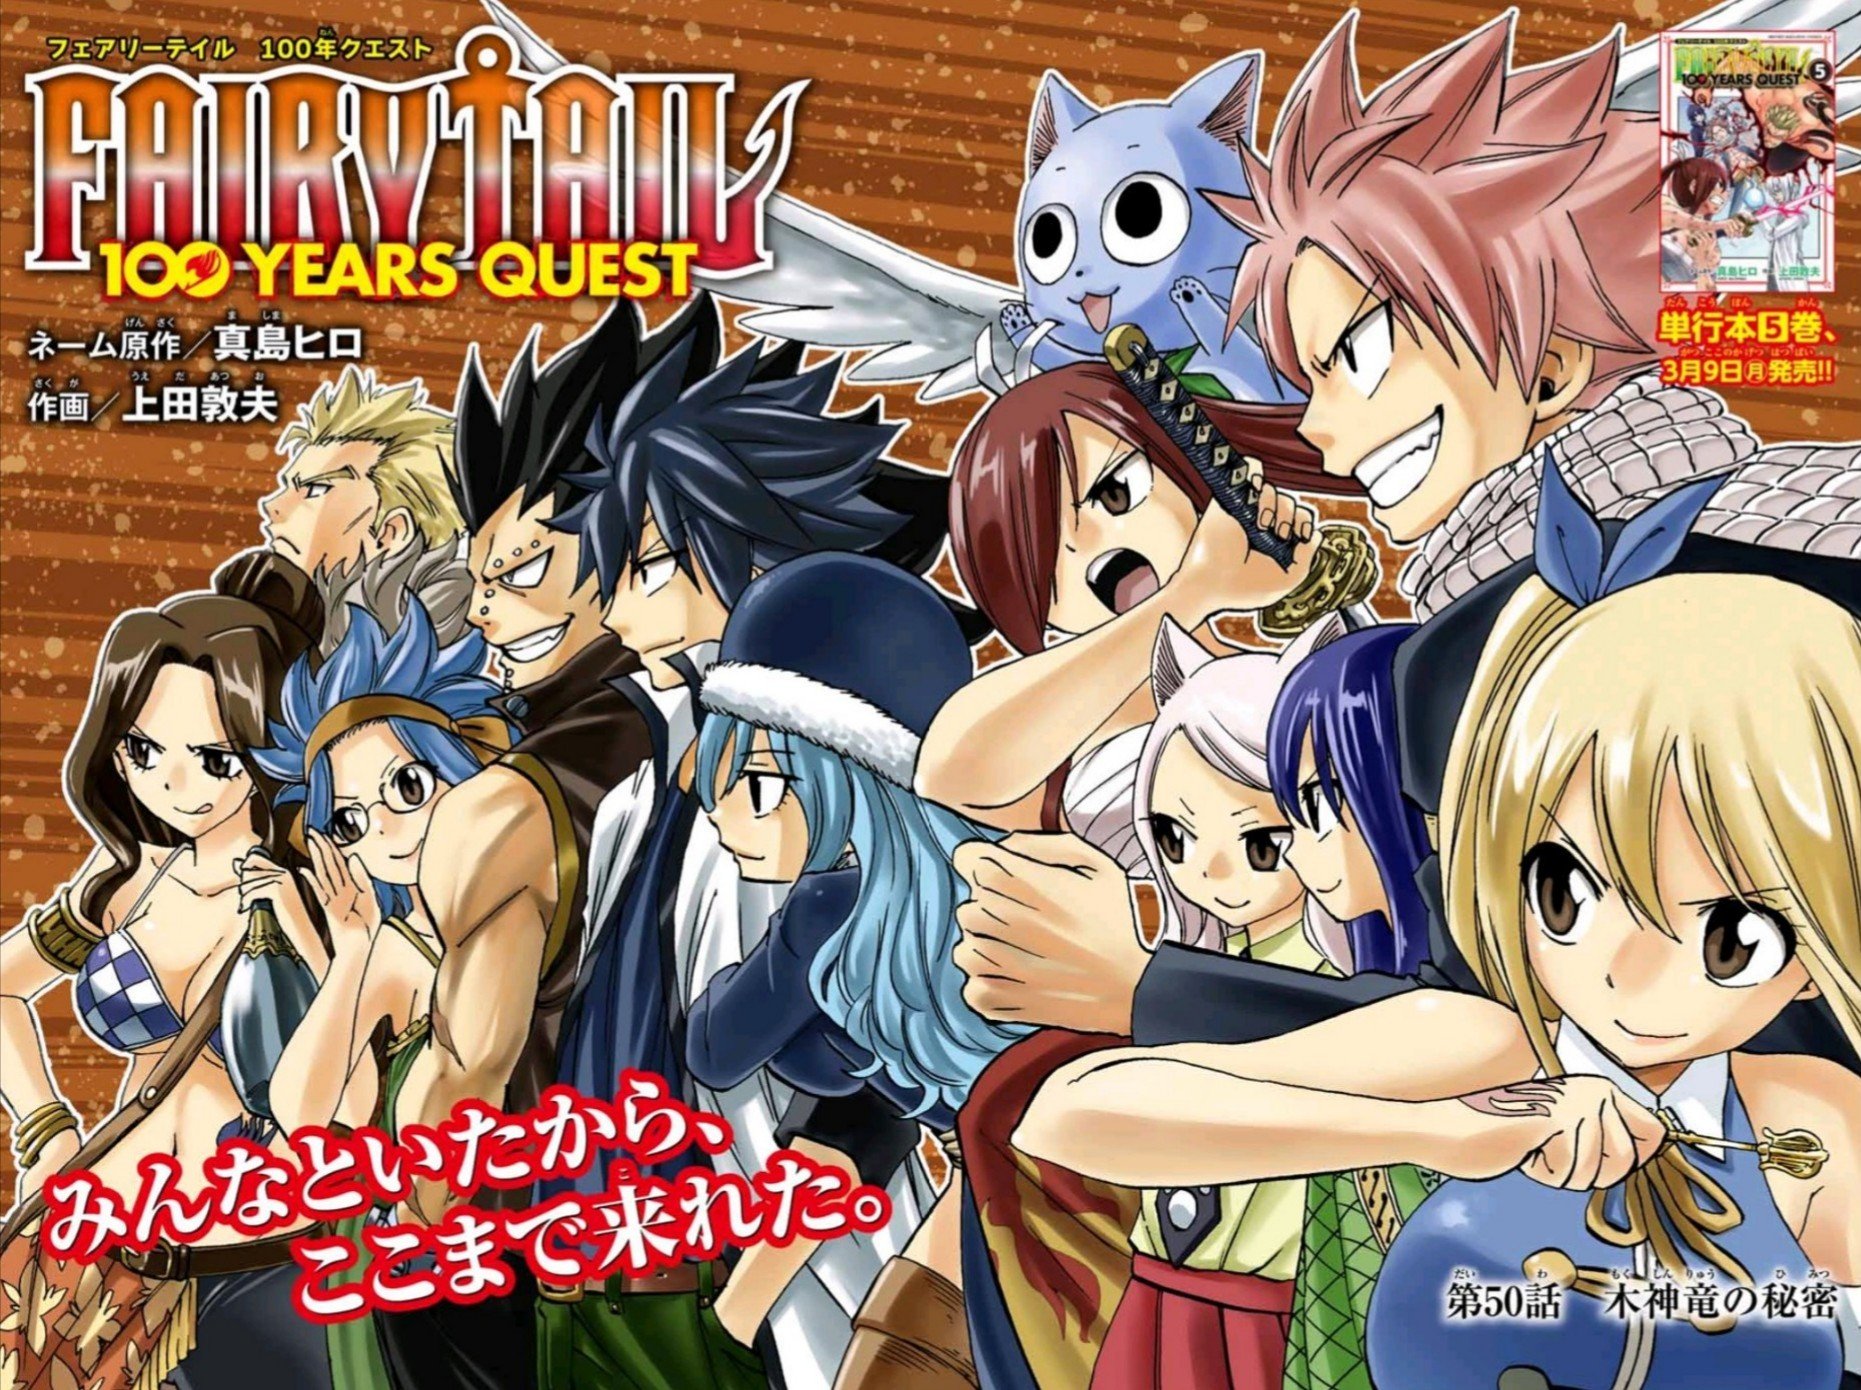 𝖣𝖺𝗂𝗅𝗒 𝖥𝖺𝗂𝗋𝗒 𝖳𝖺𝗂𝗅 on X: December 2023 and still no News about Fairy  Tail 100 years quest anime  / X